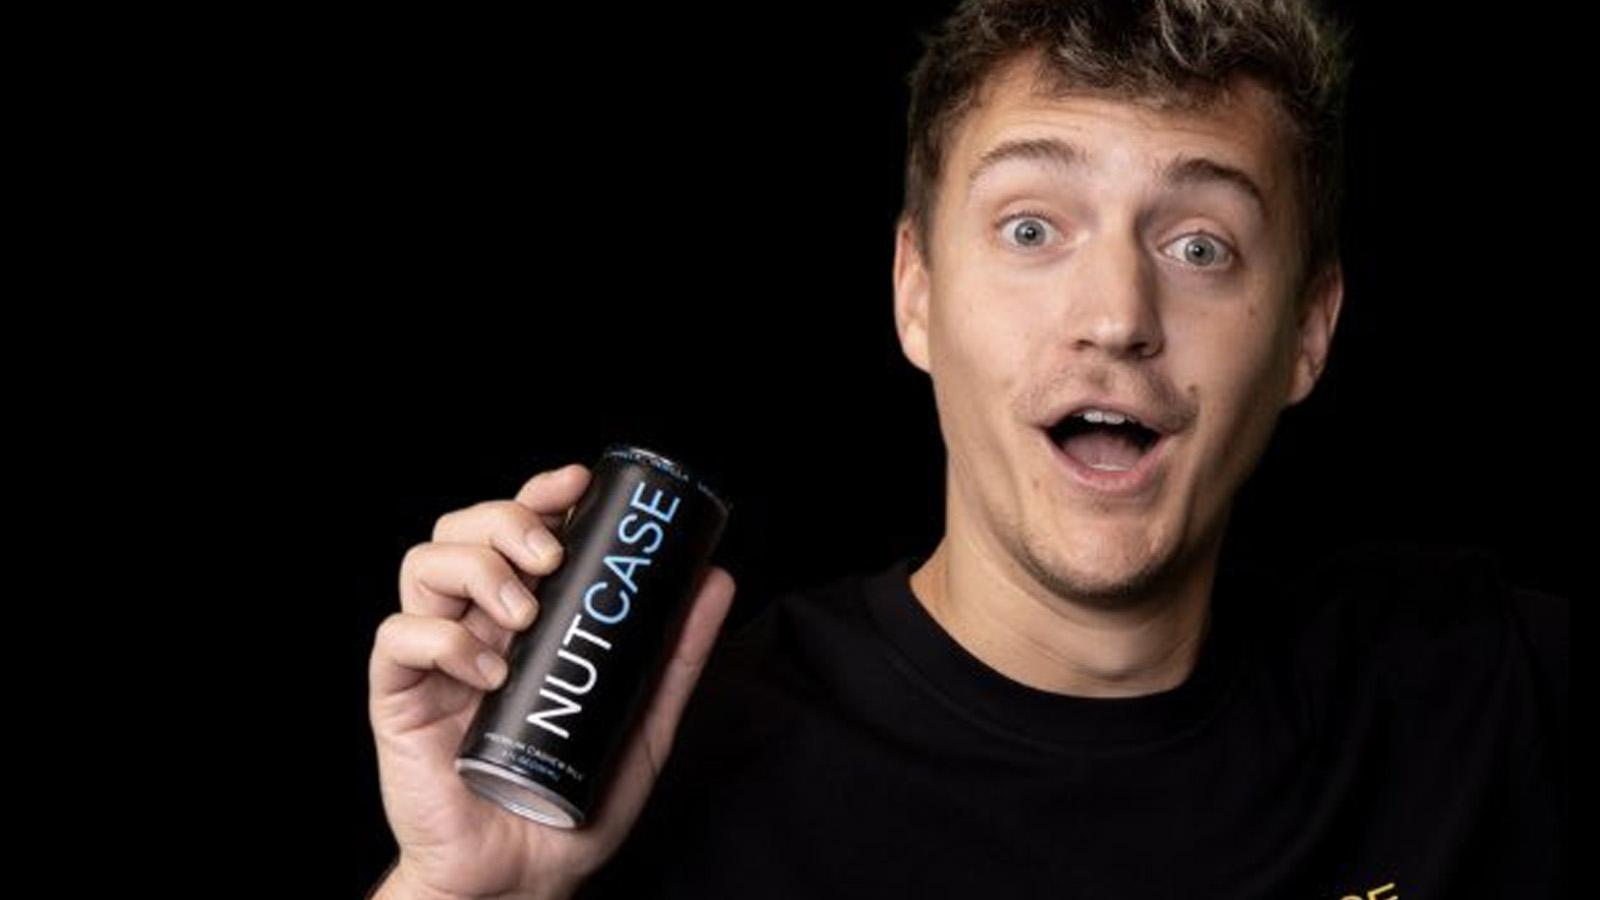 Ninja looking into the camera holding a can of nutcase